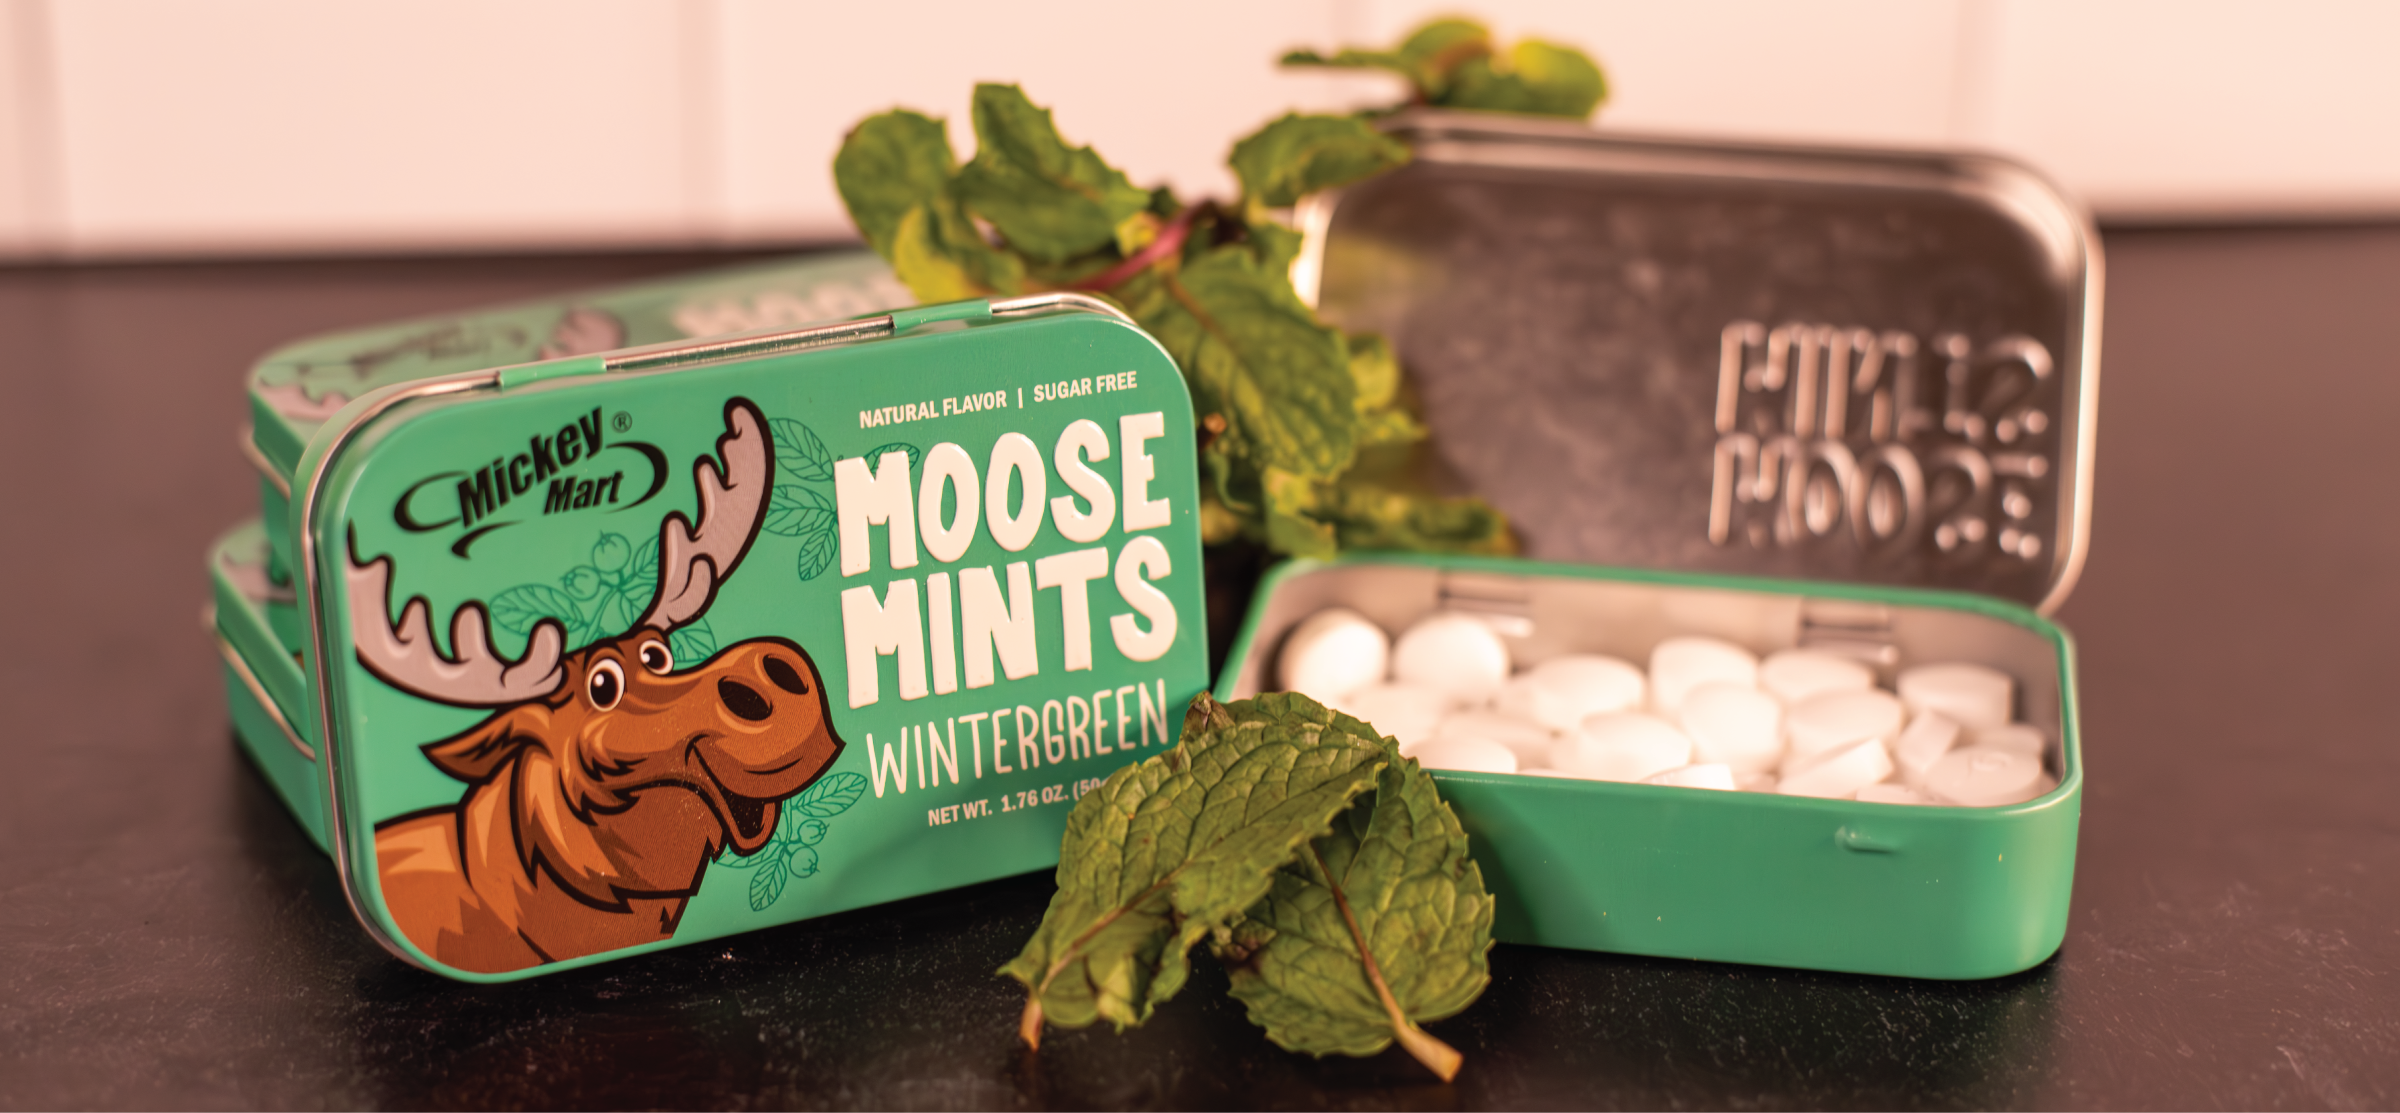 Metal Mint containers with one open showing the small white mints inside. The tin cover has a moose and the words "Moose Mints - Evergreen" and a few mint leaves rest on the stack of tins